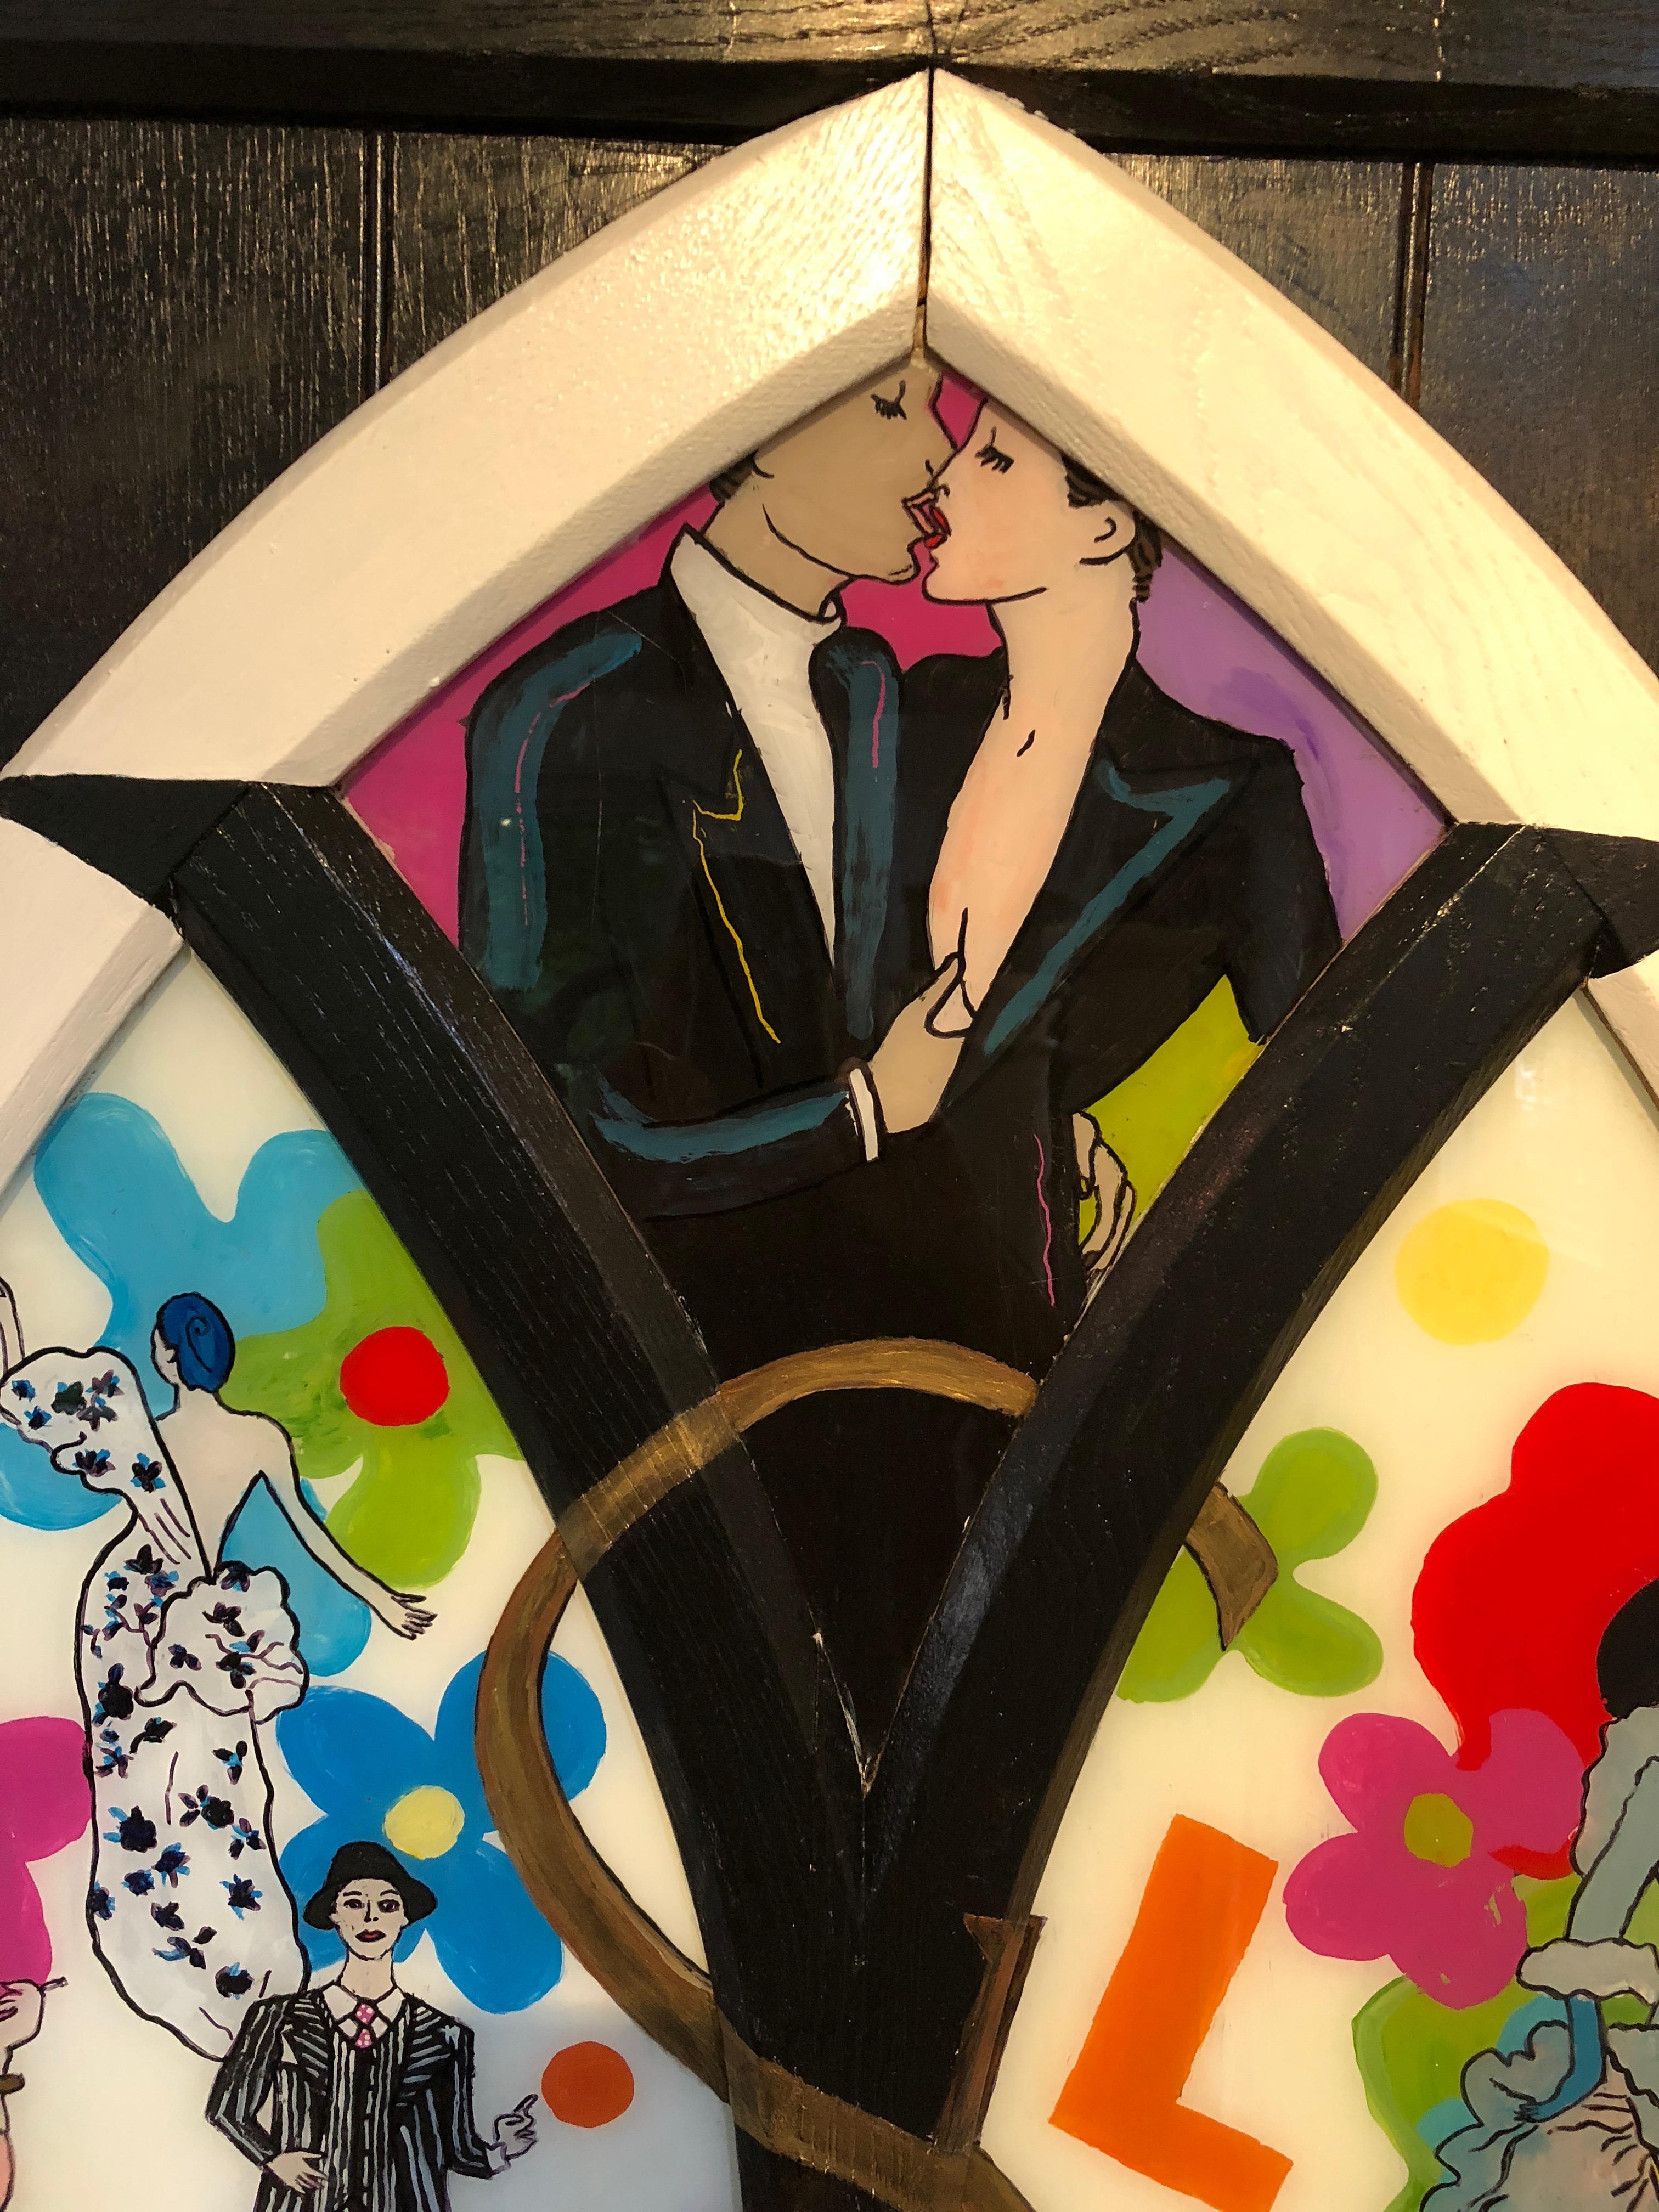 Bold and fascinating original reverse painting on the glass of a vintage gothic window, with subject matter inspired by the iconic designer Yves Saint Laurent. Models float in the composition outfitted in his fabulous clothes, including the history